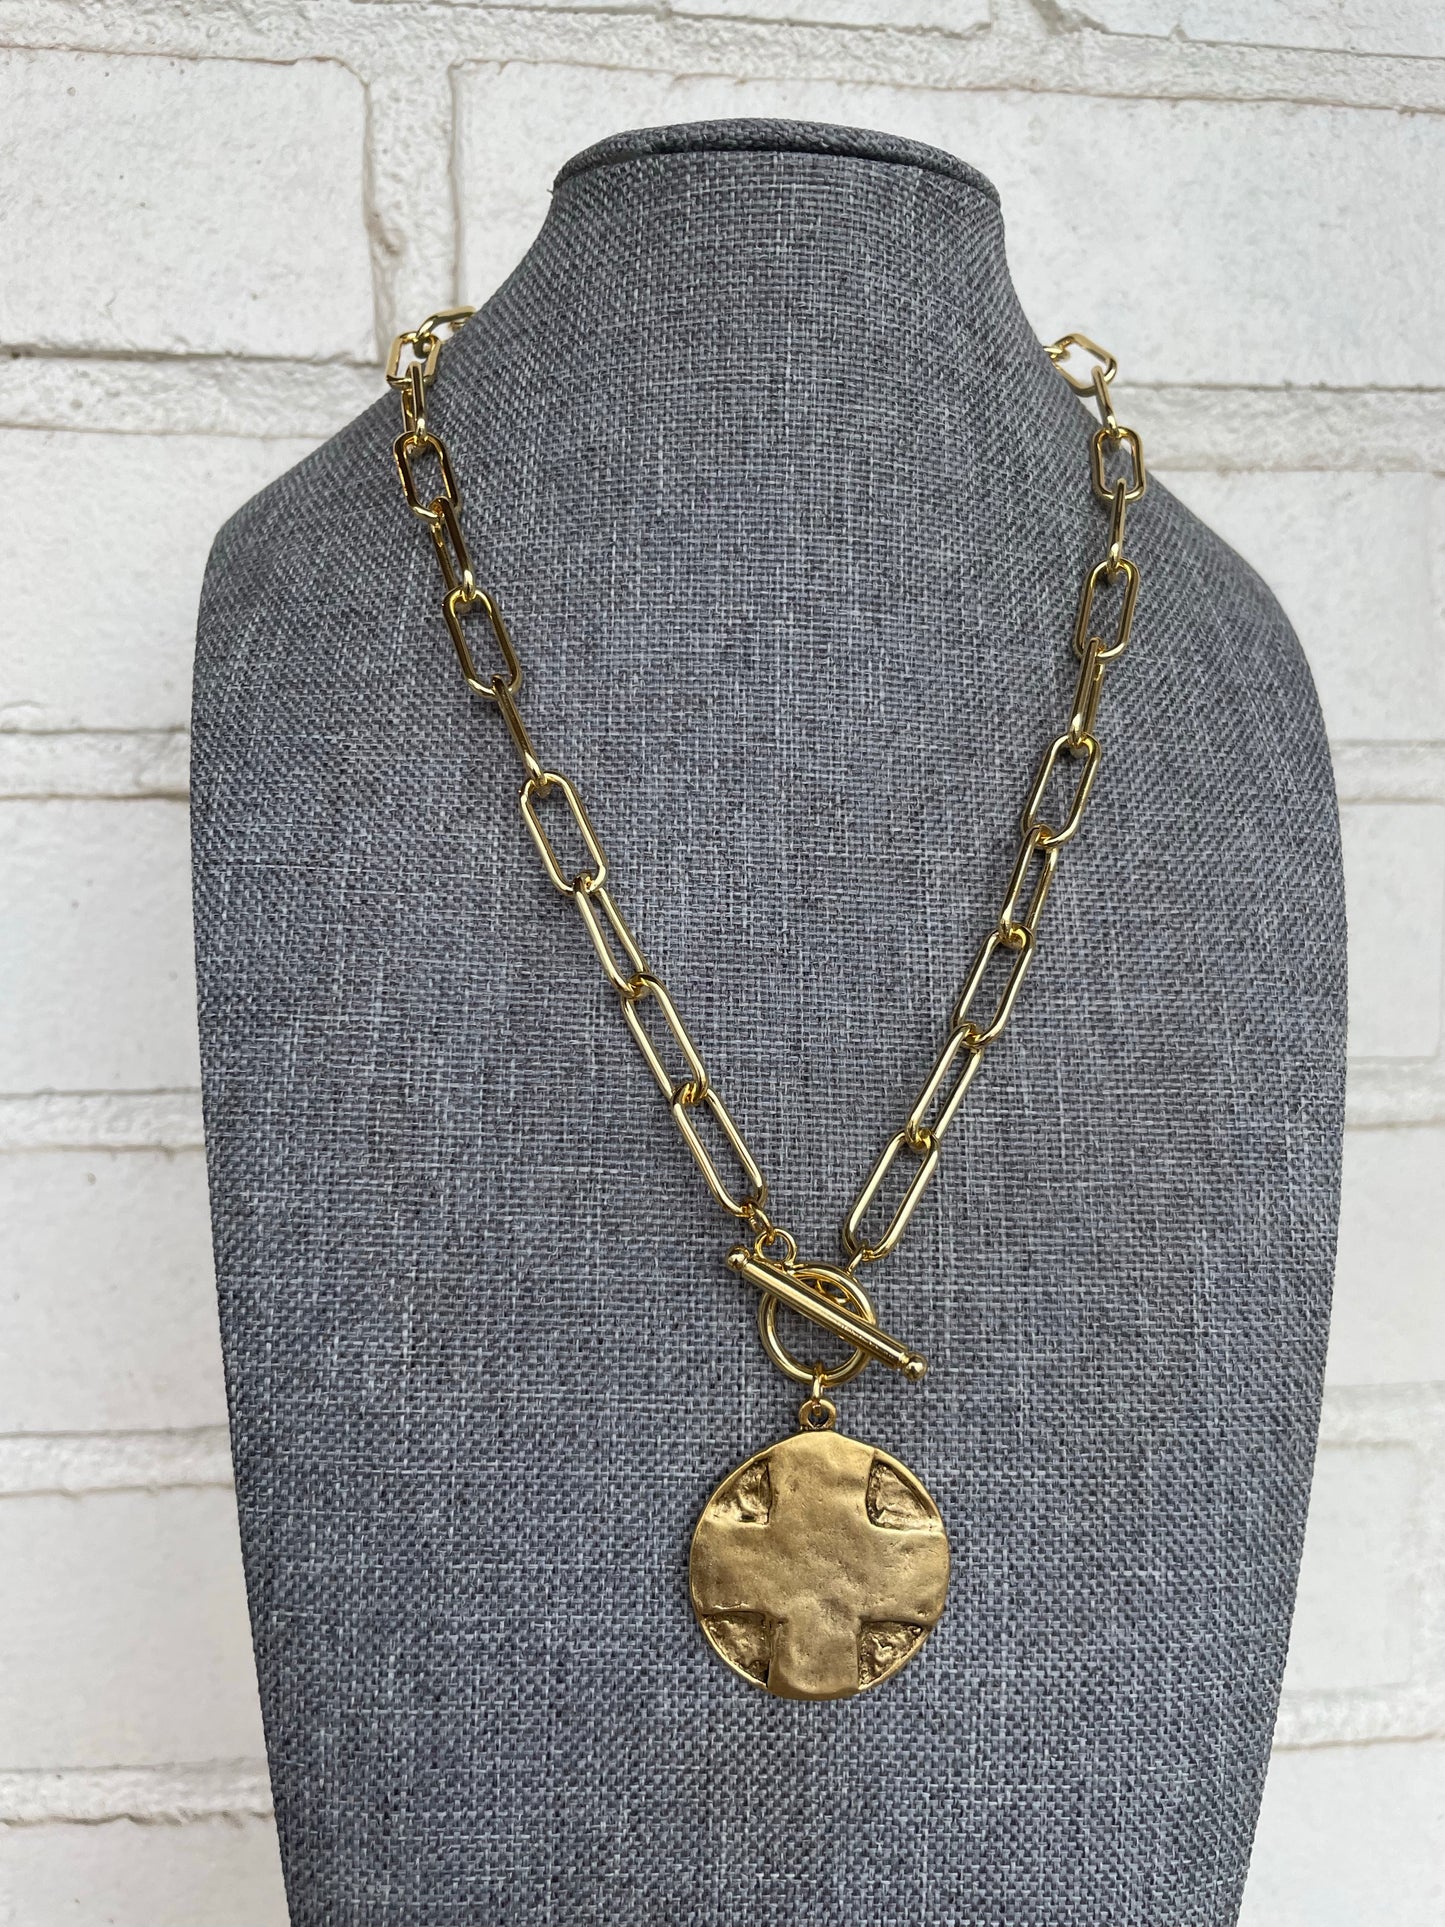 Lord’s Prayer Charm Necklace | 24k Gold Plated